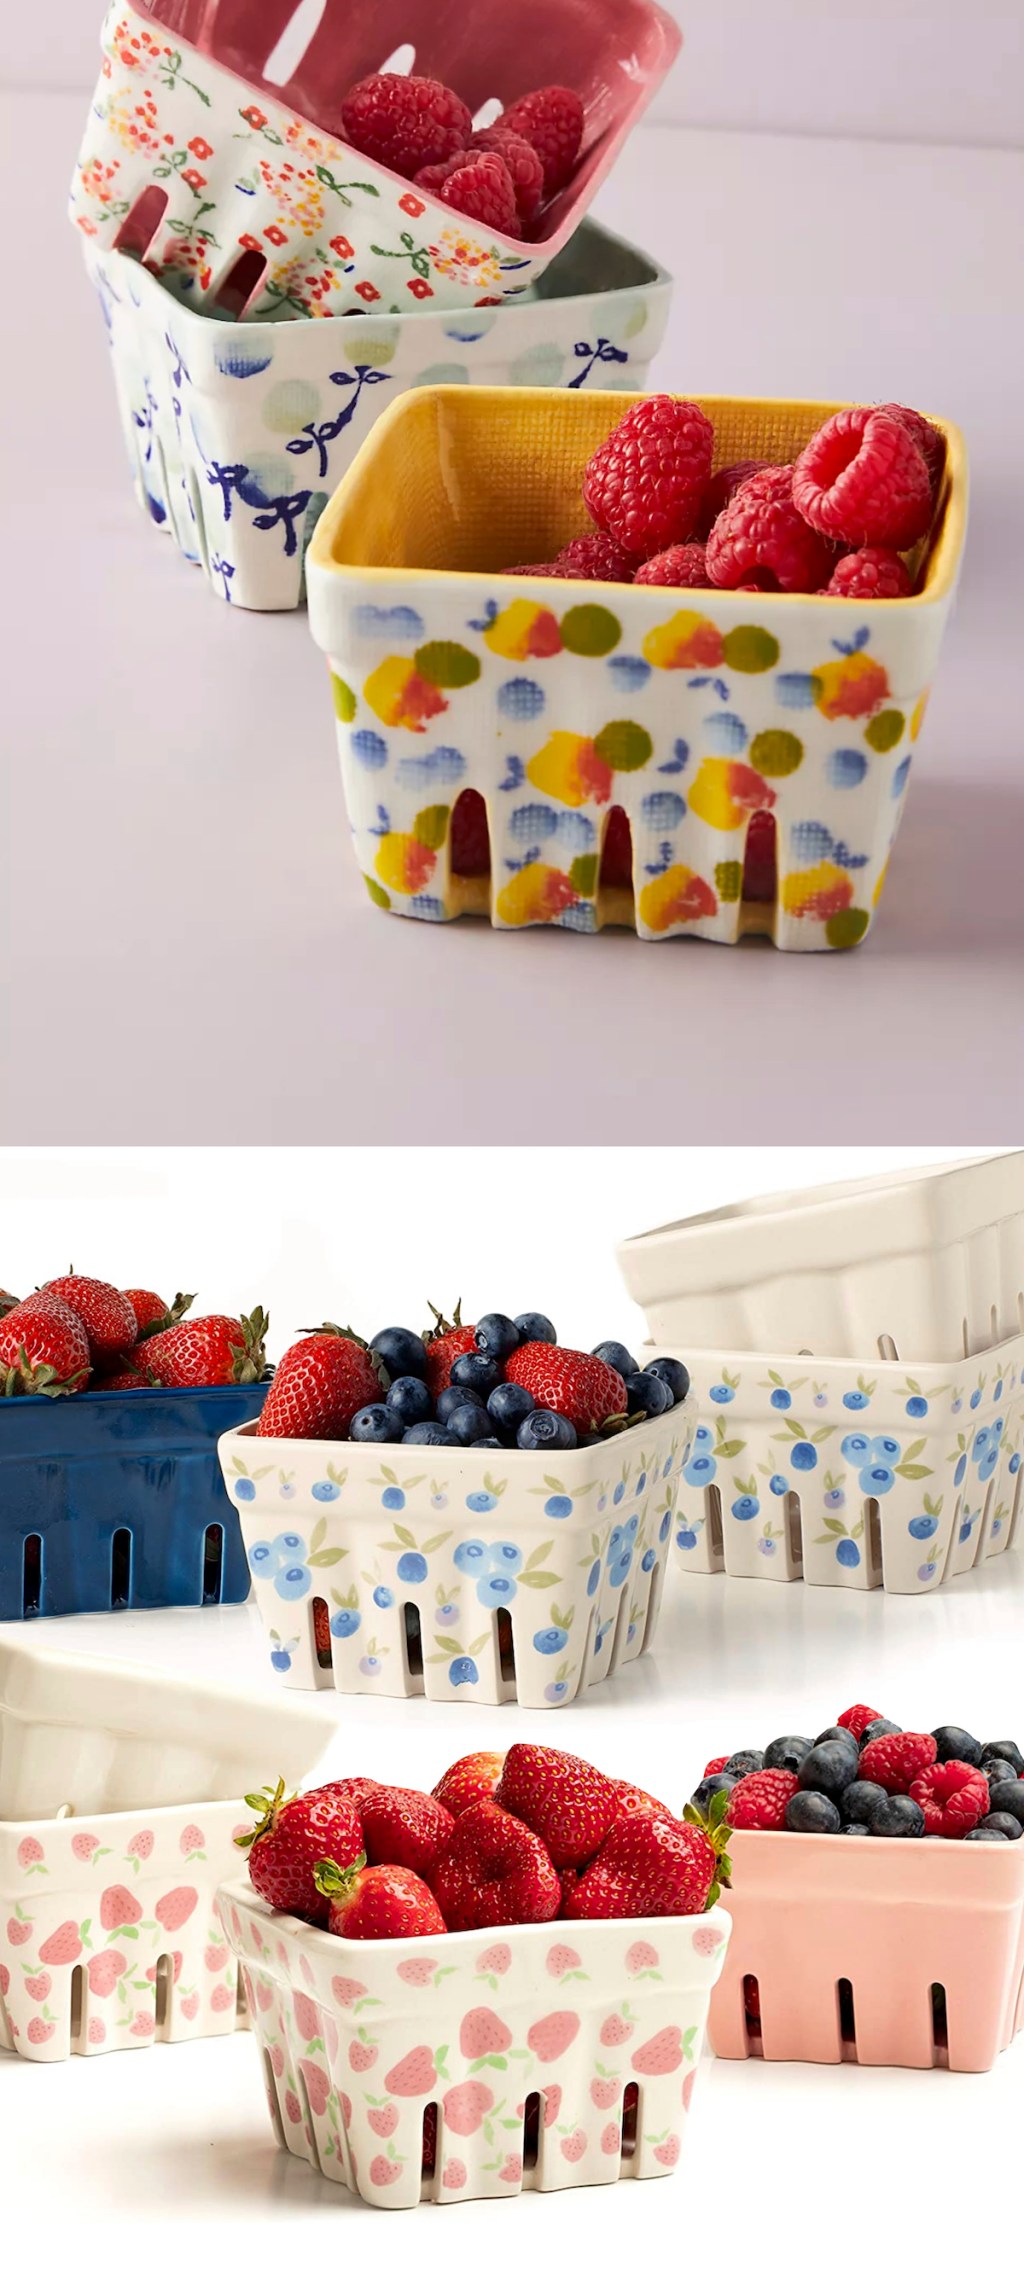 various styles of fruit berry baskets on display with fresh berries inside